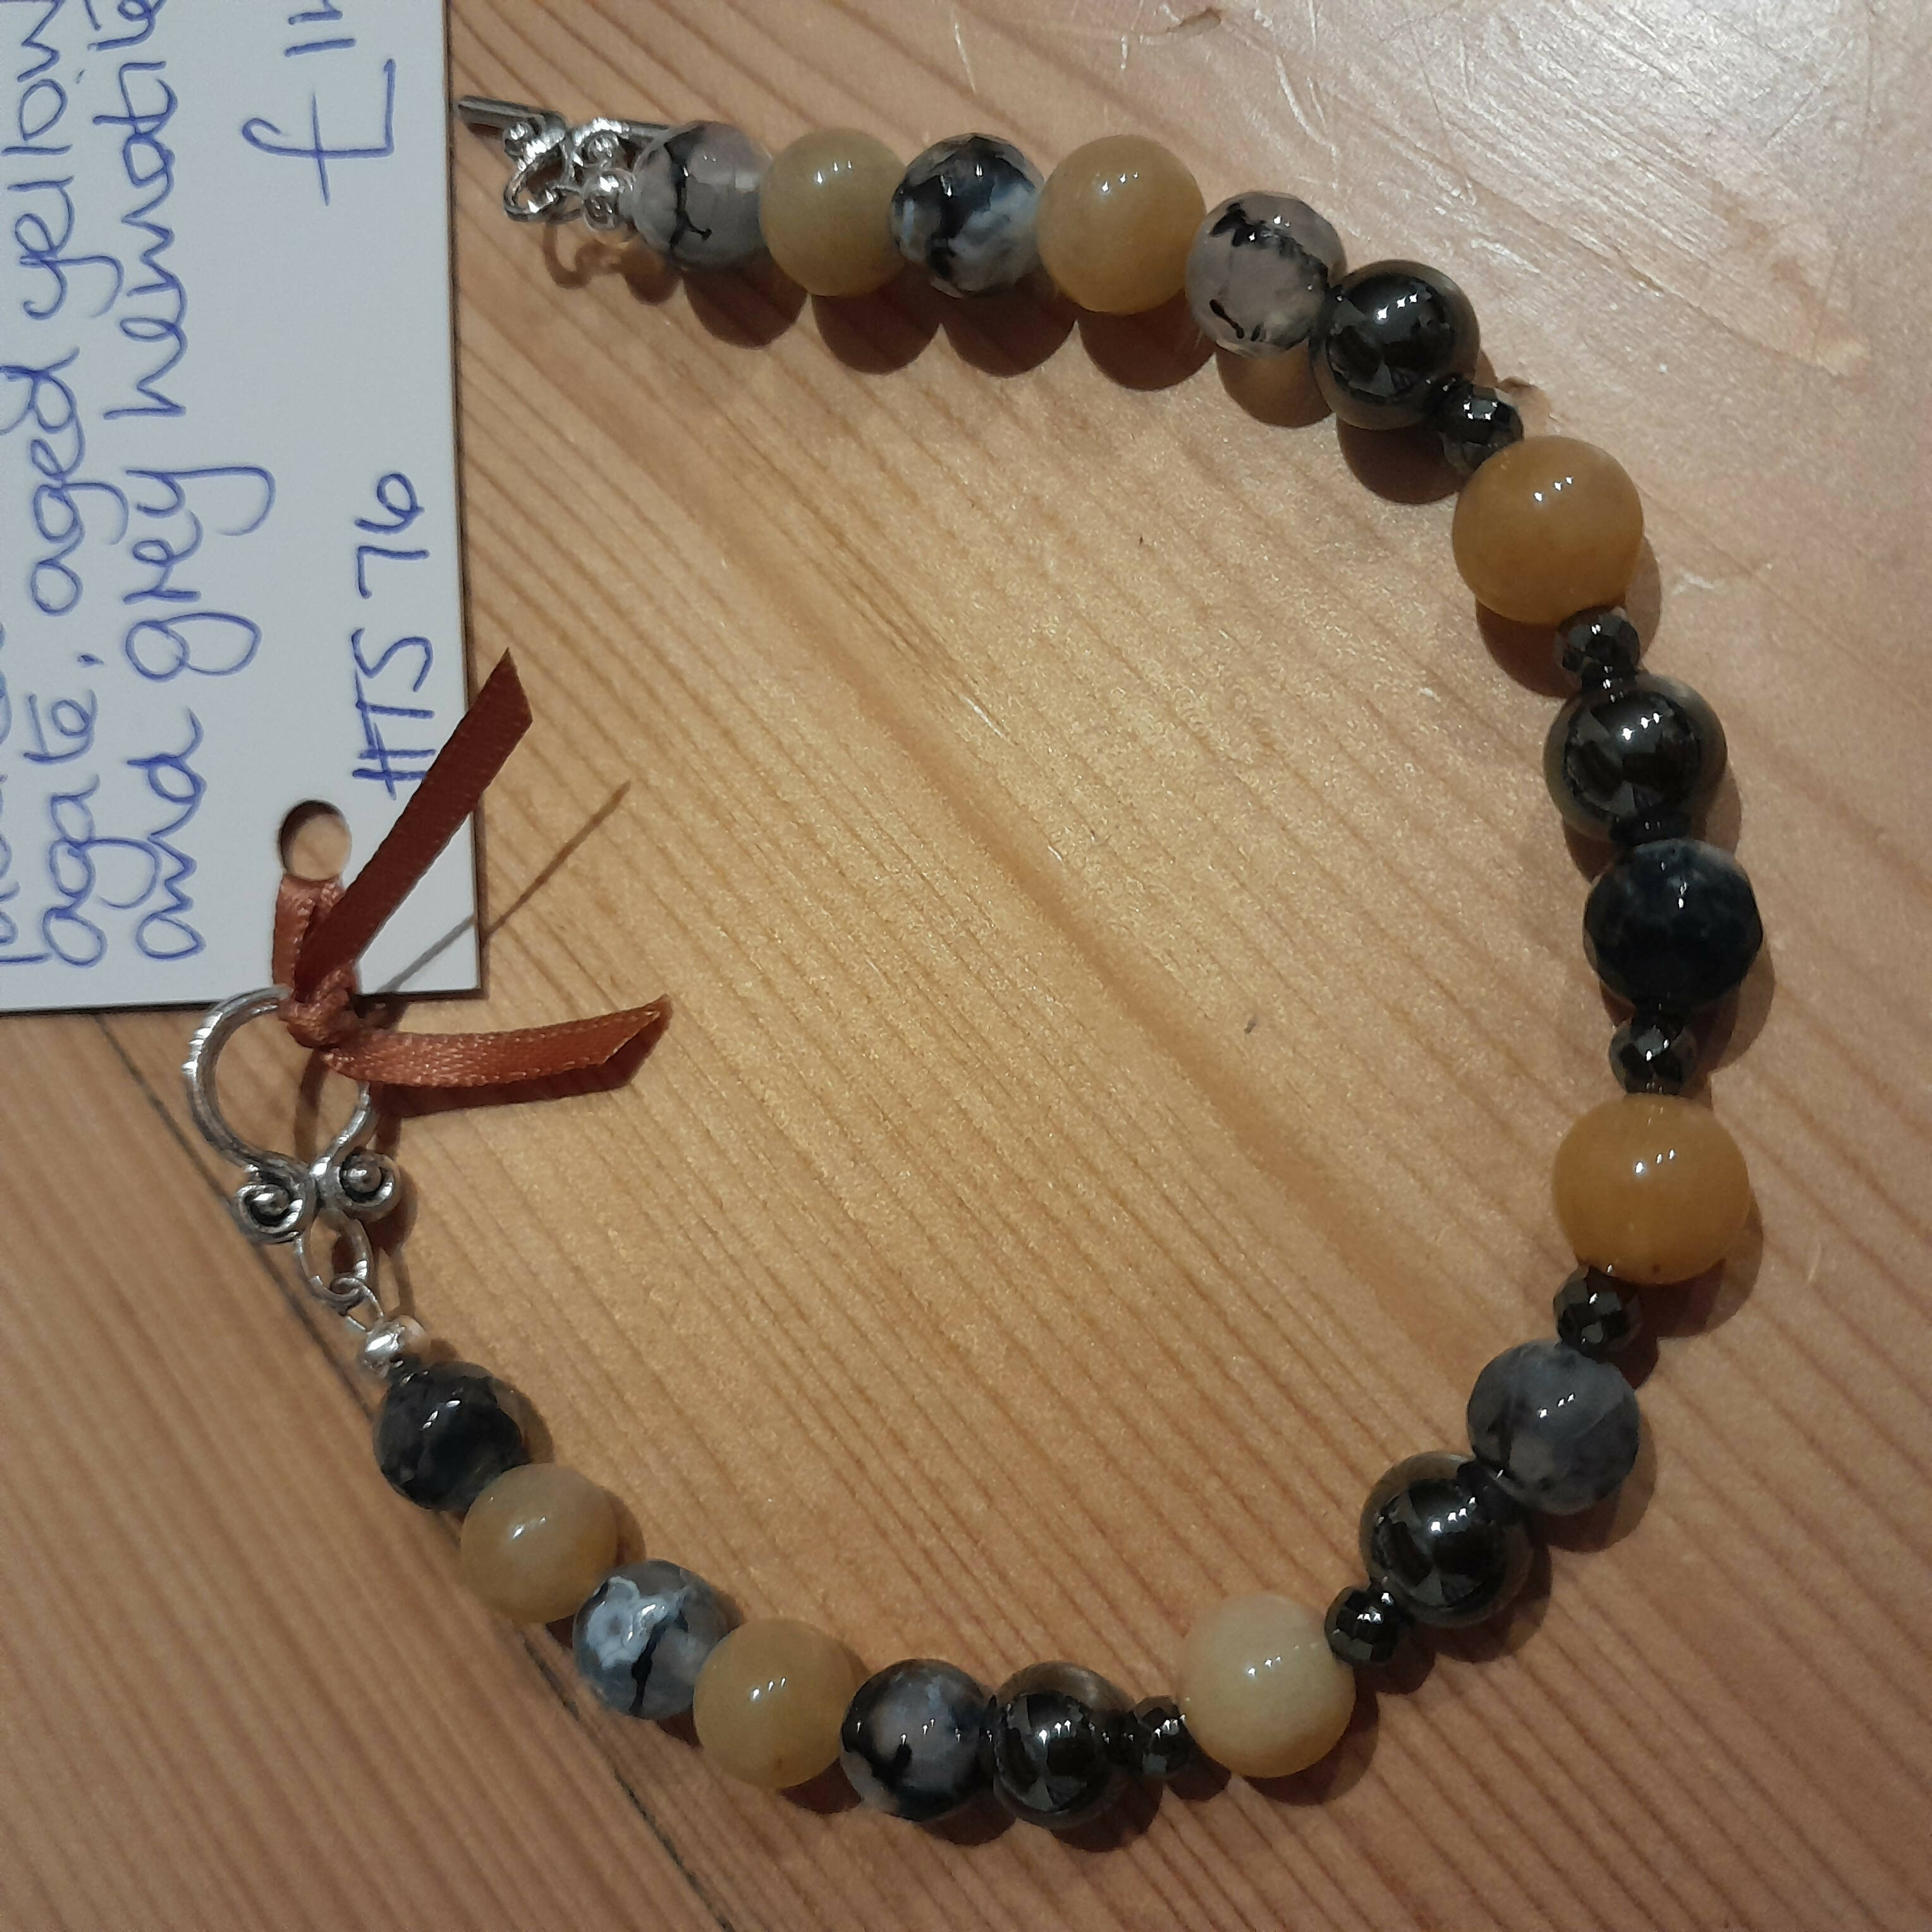 Tibetan Silver Toggle Clasp Bracelet with Faceted Dragon Vein Fire Agate, Aged Yellow Jade and Grey Hematite